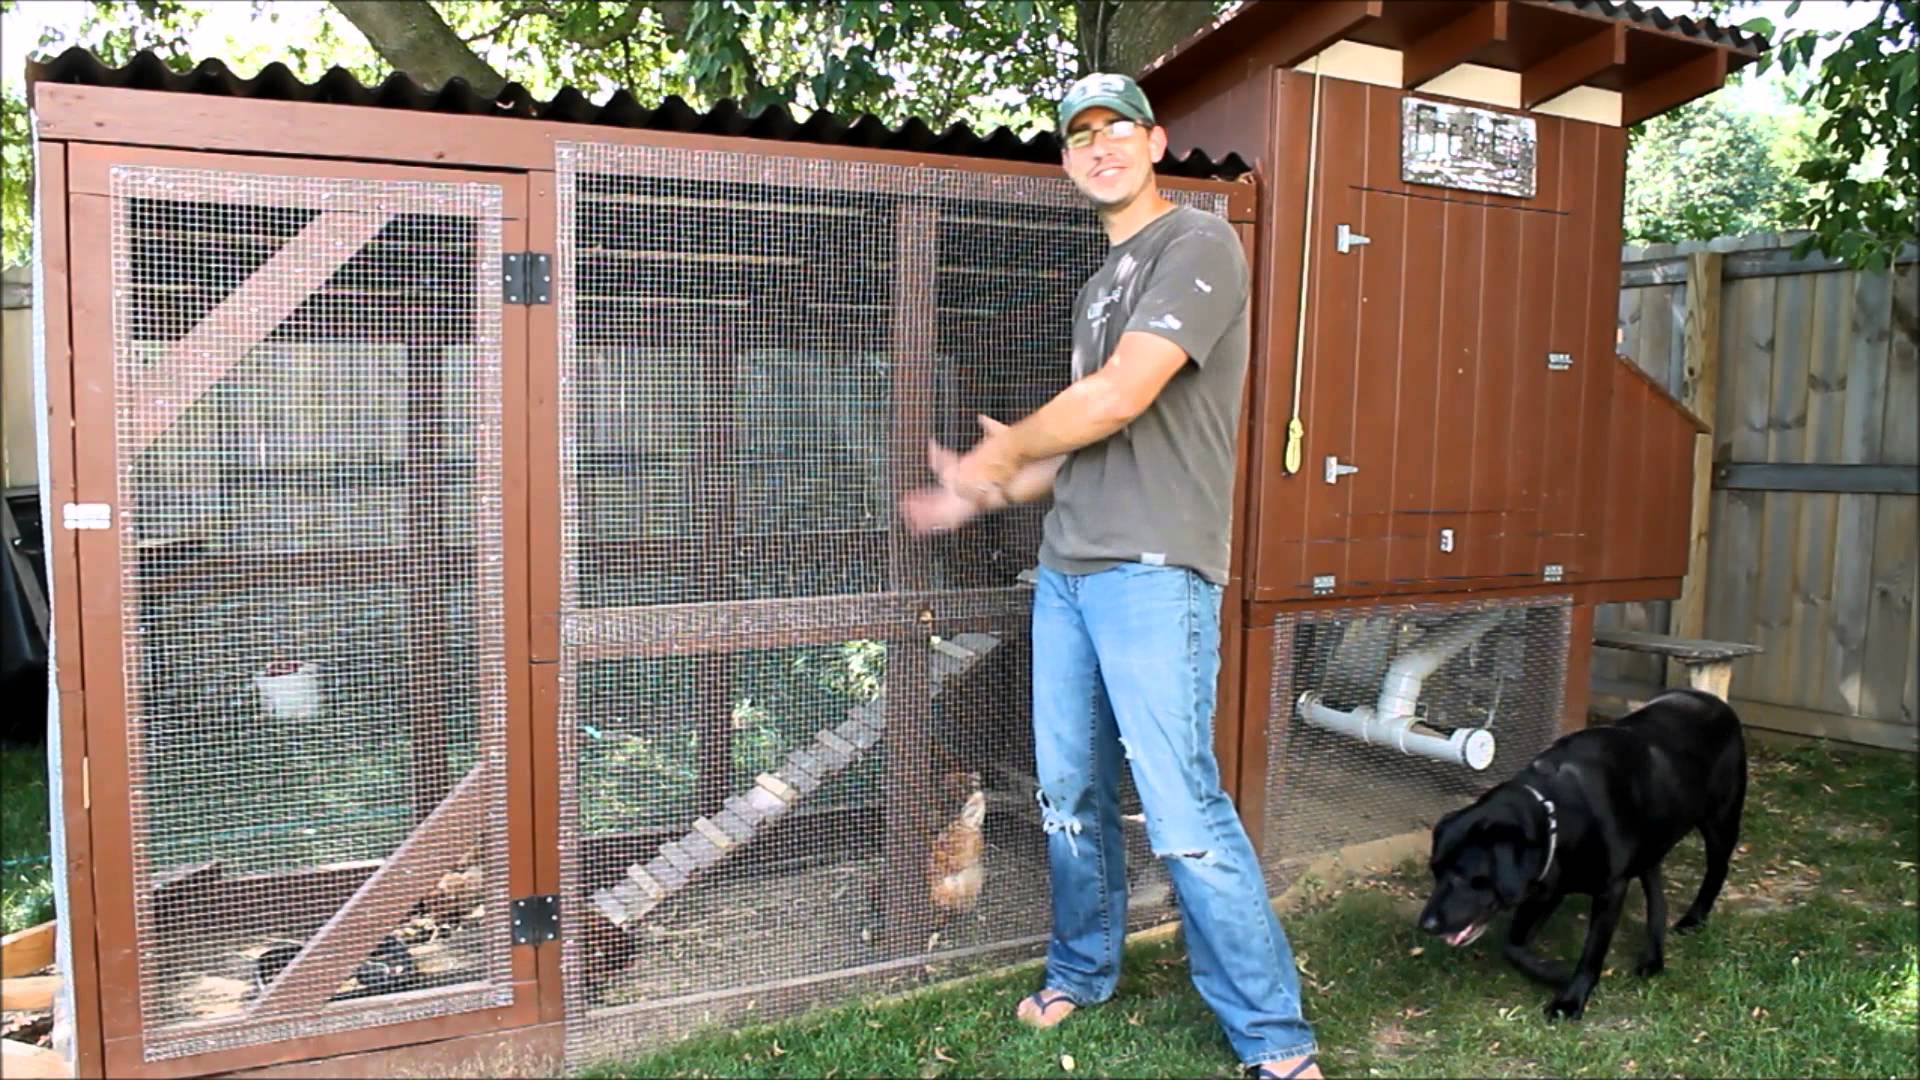 Backyard Chickens - Is it Really Worth it? - YouTube